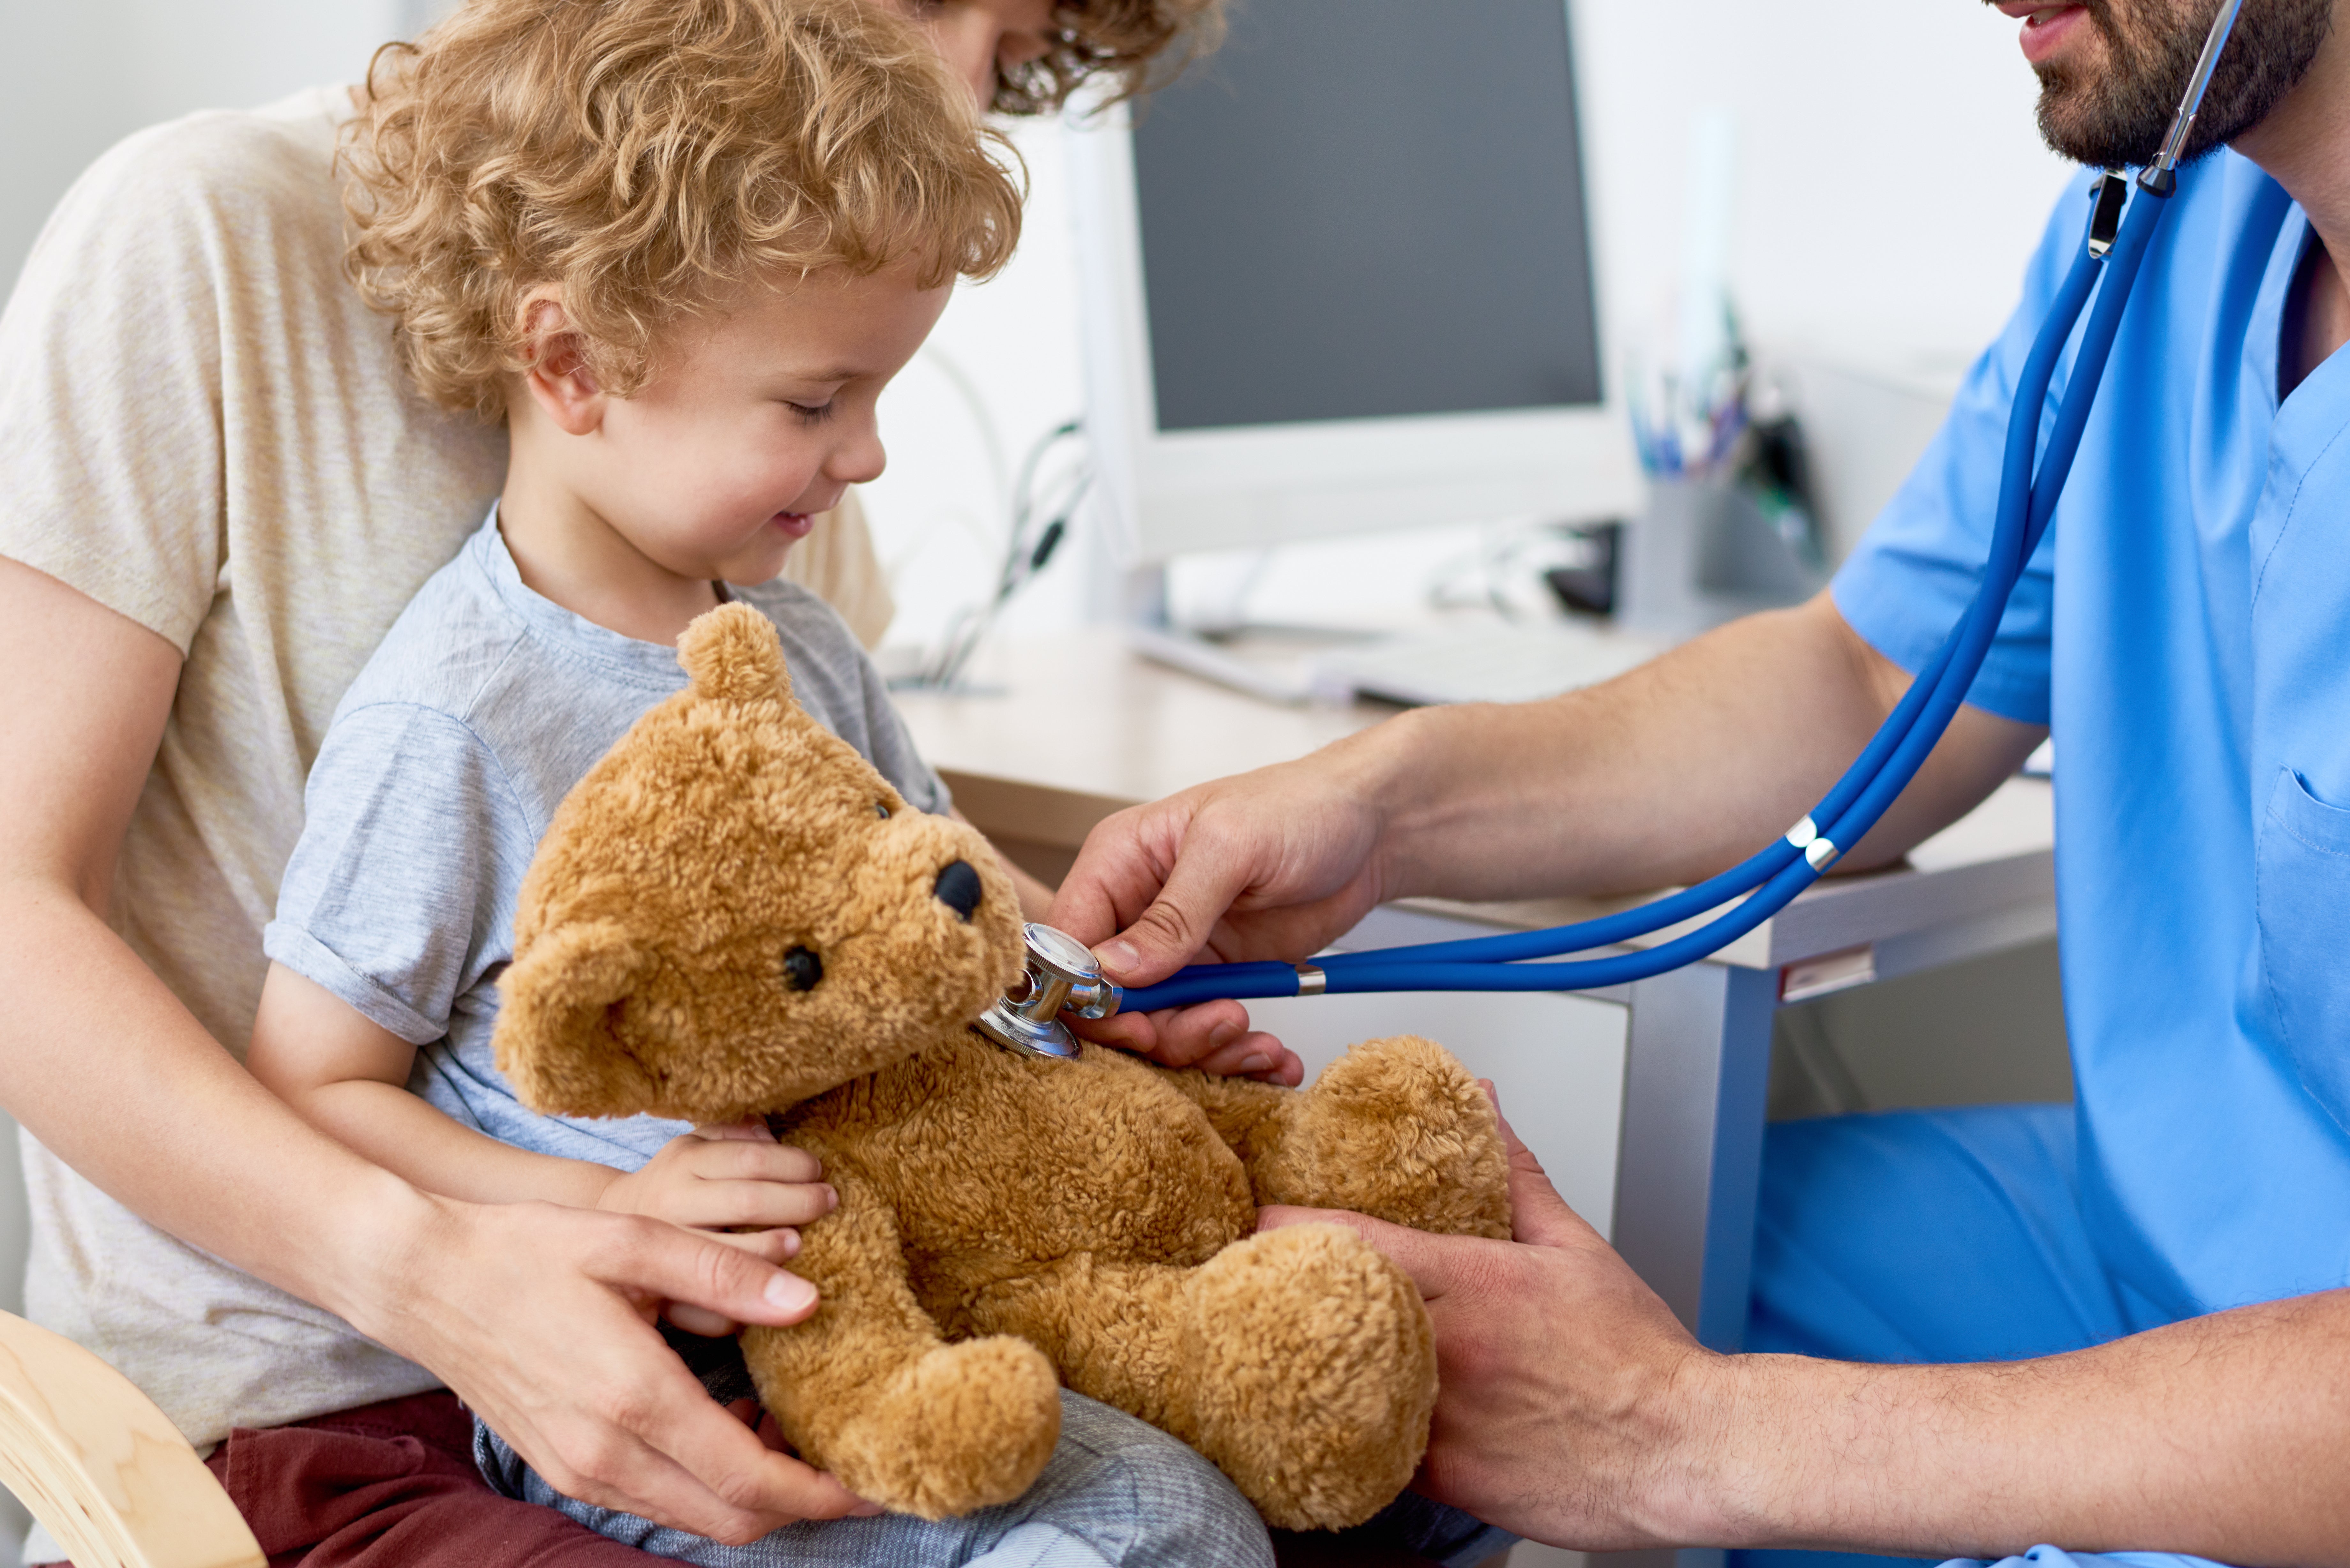 Paediatricians are drawn in as fears grow that the health of struggling households will suffer this winter